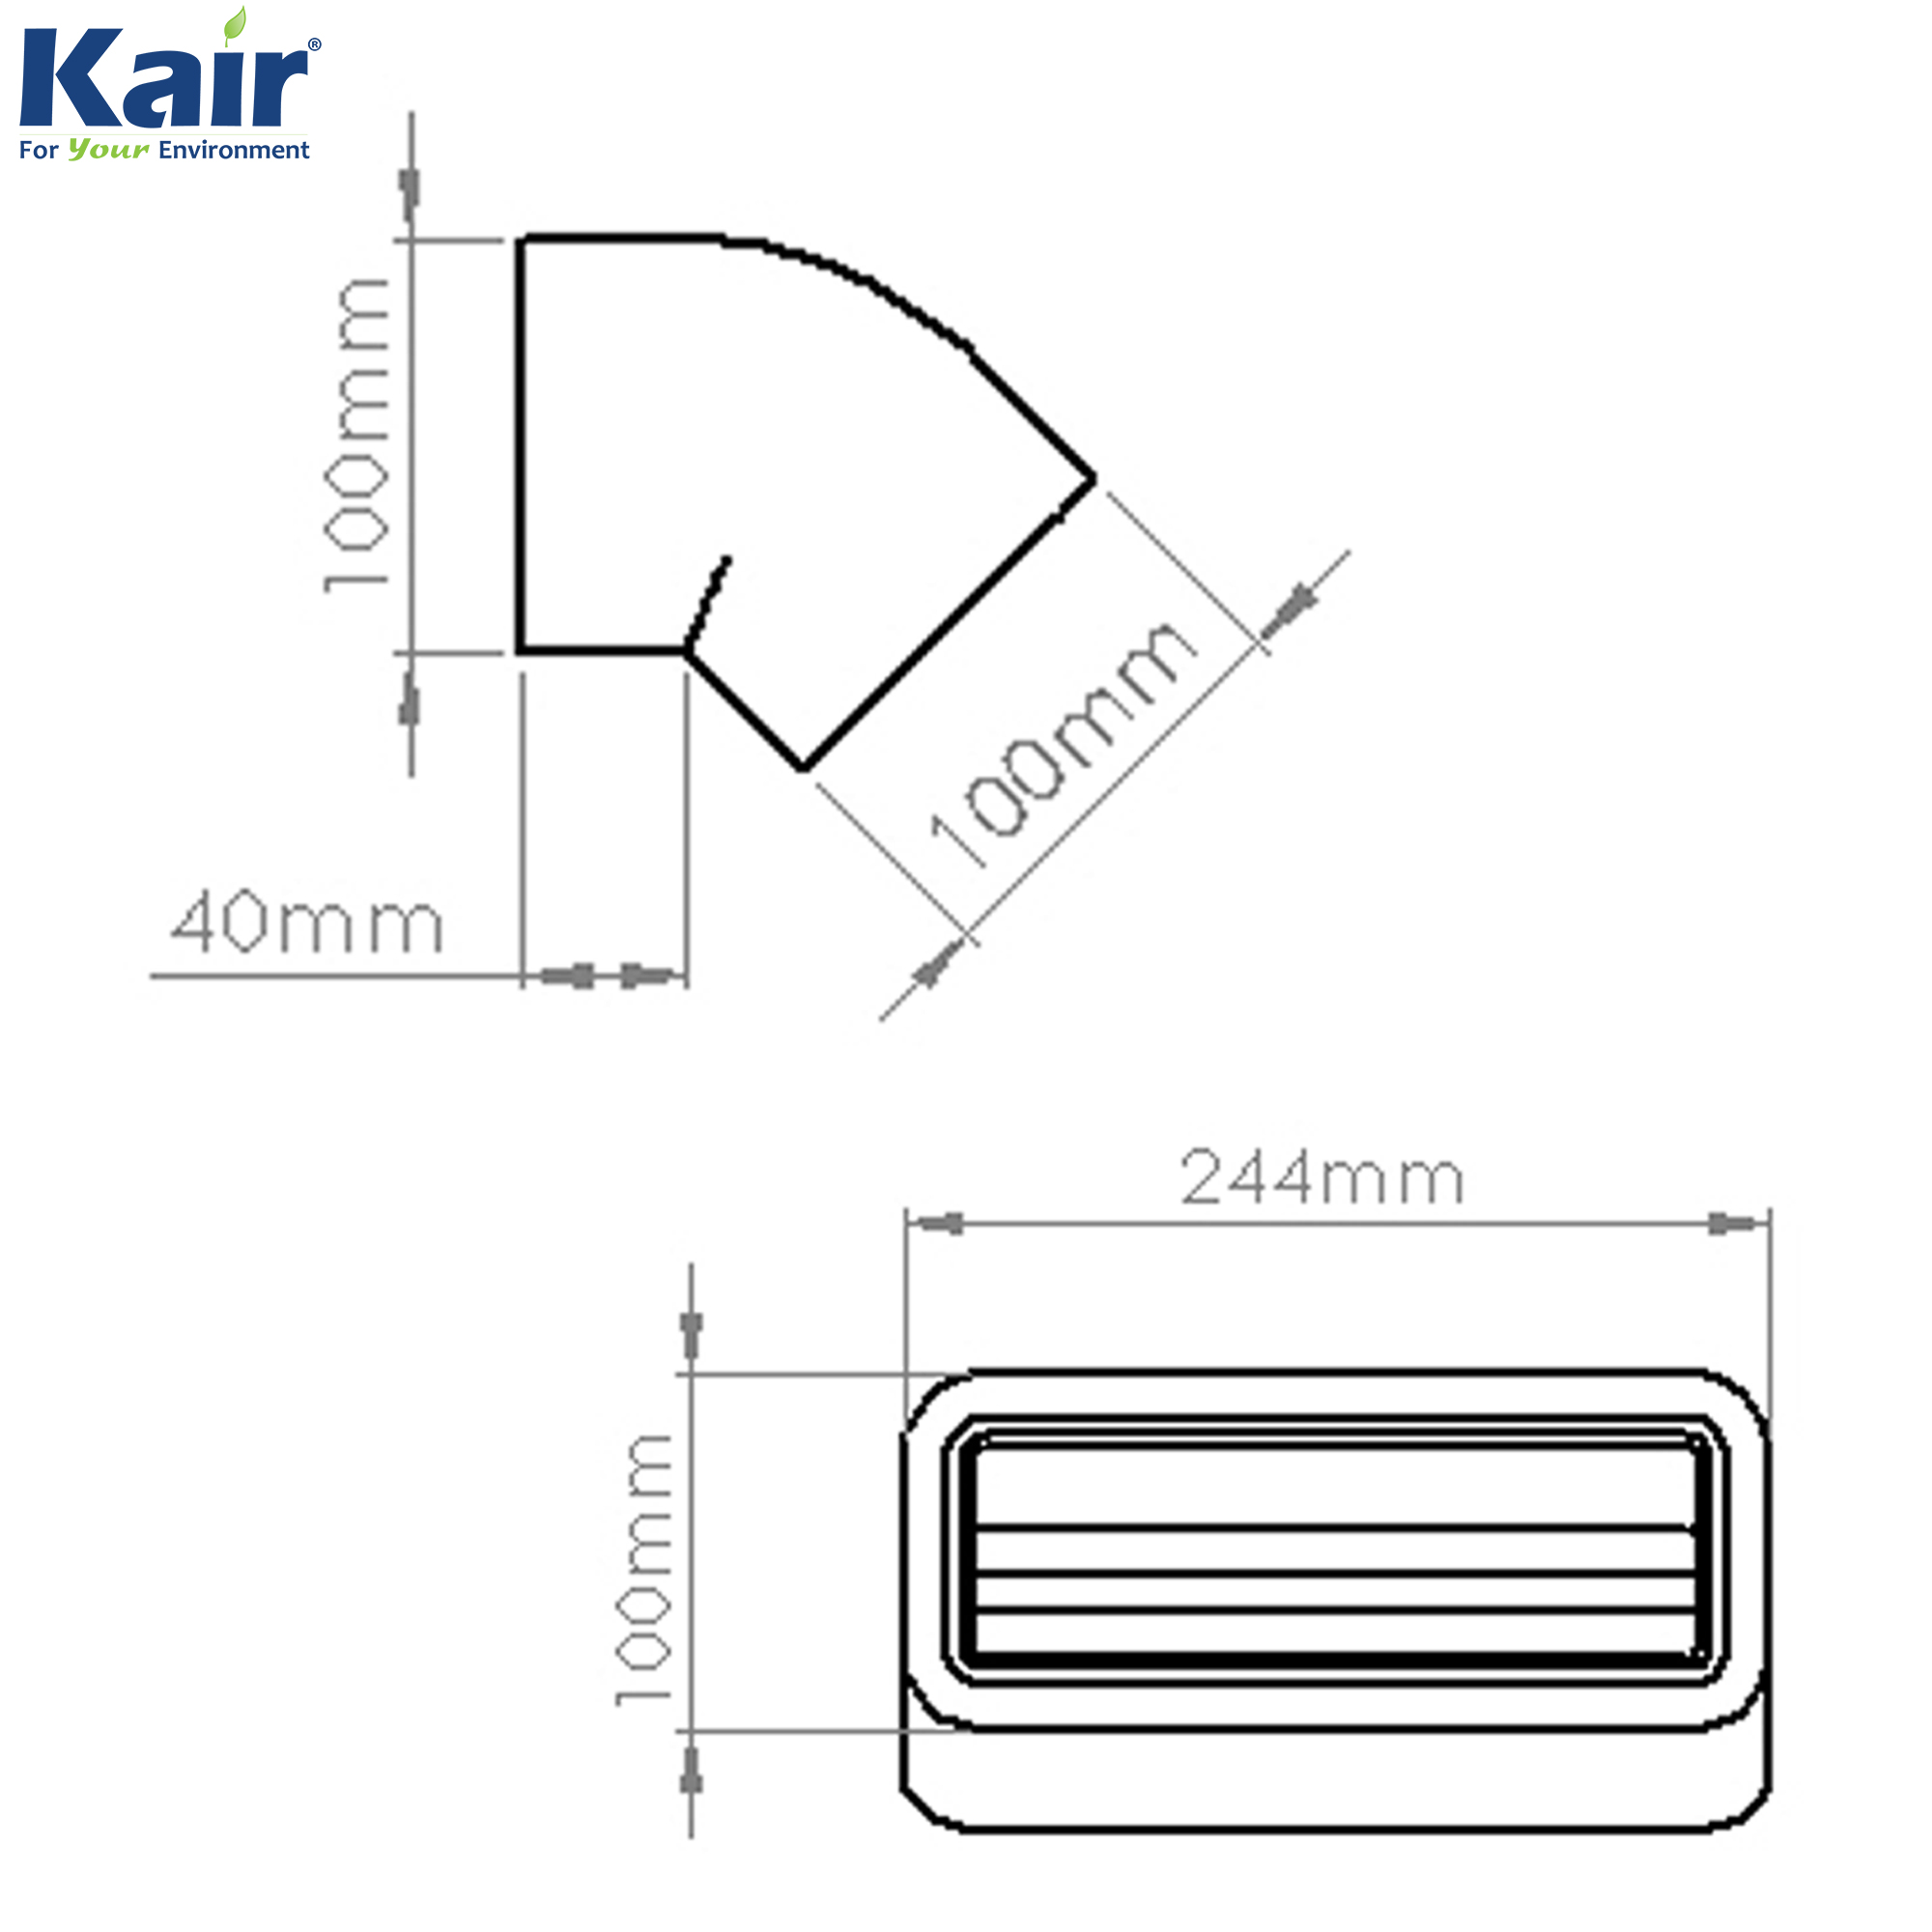 Box of 12 x Kair Self-Seal Thermal Ducting 204X60mm Vertical 45 Degree Bends Complete With Female Click And Lock Fittings